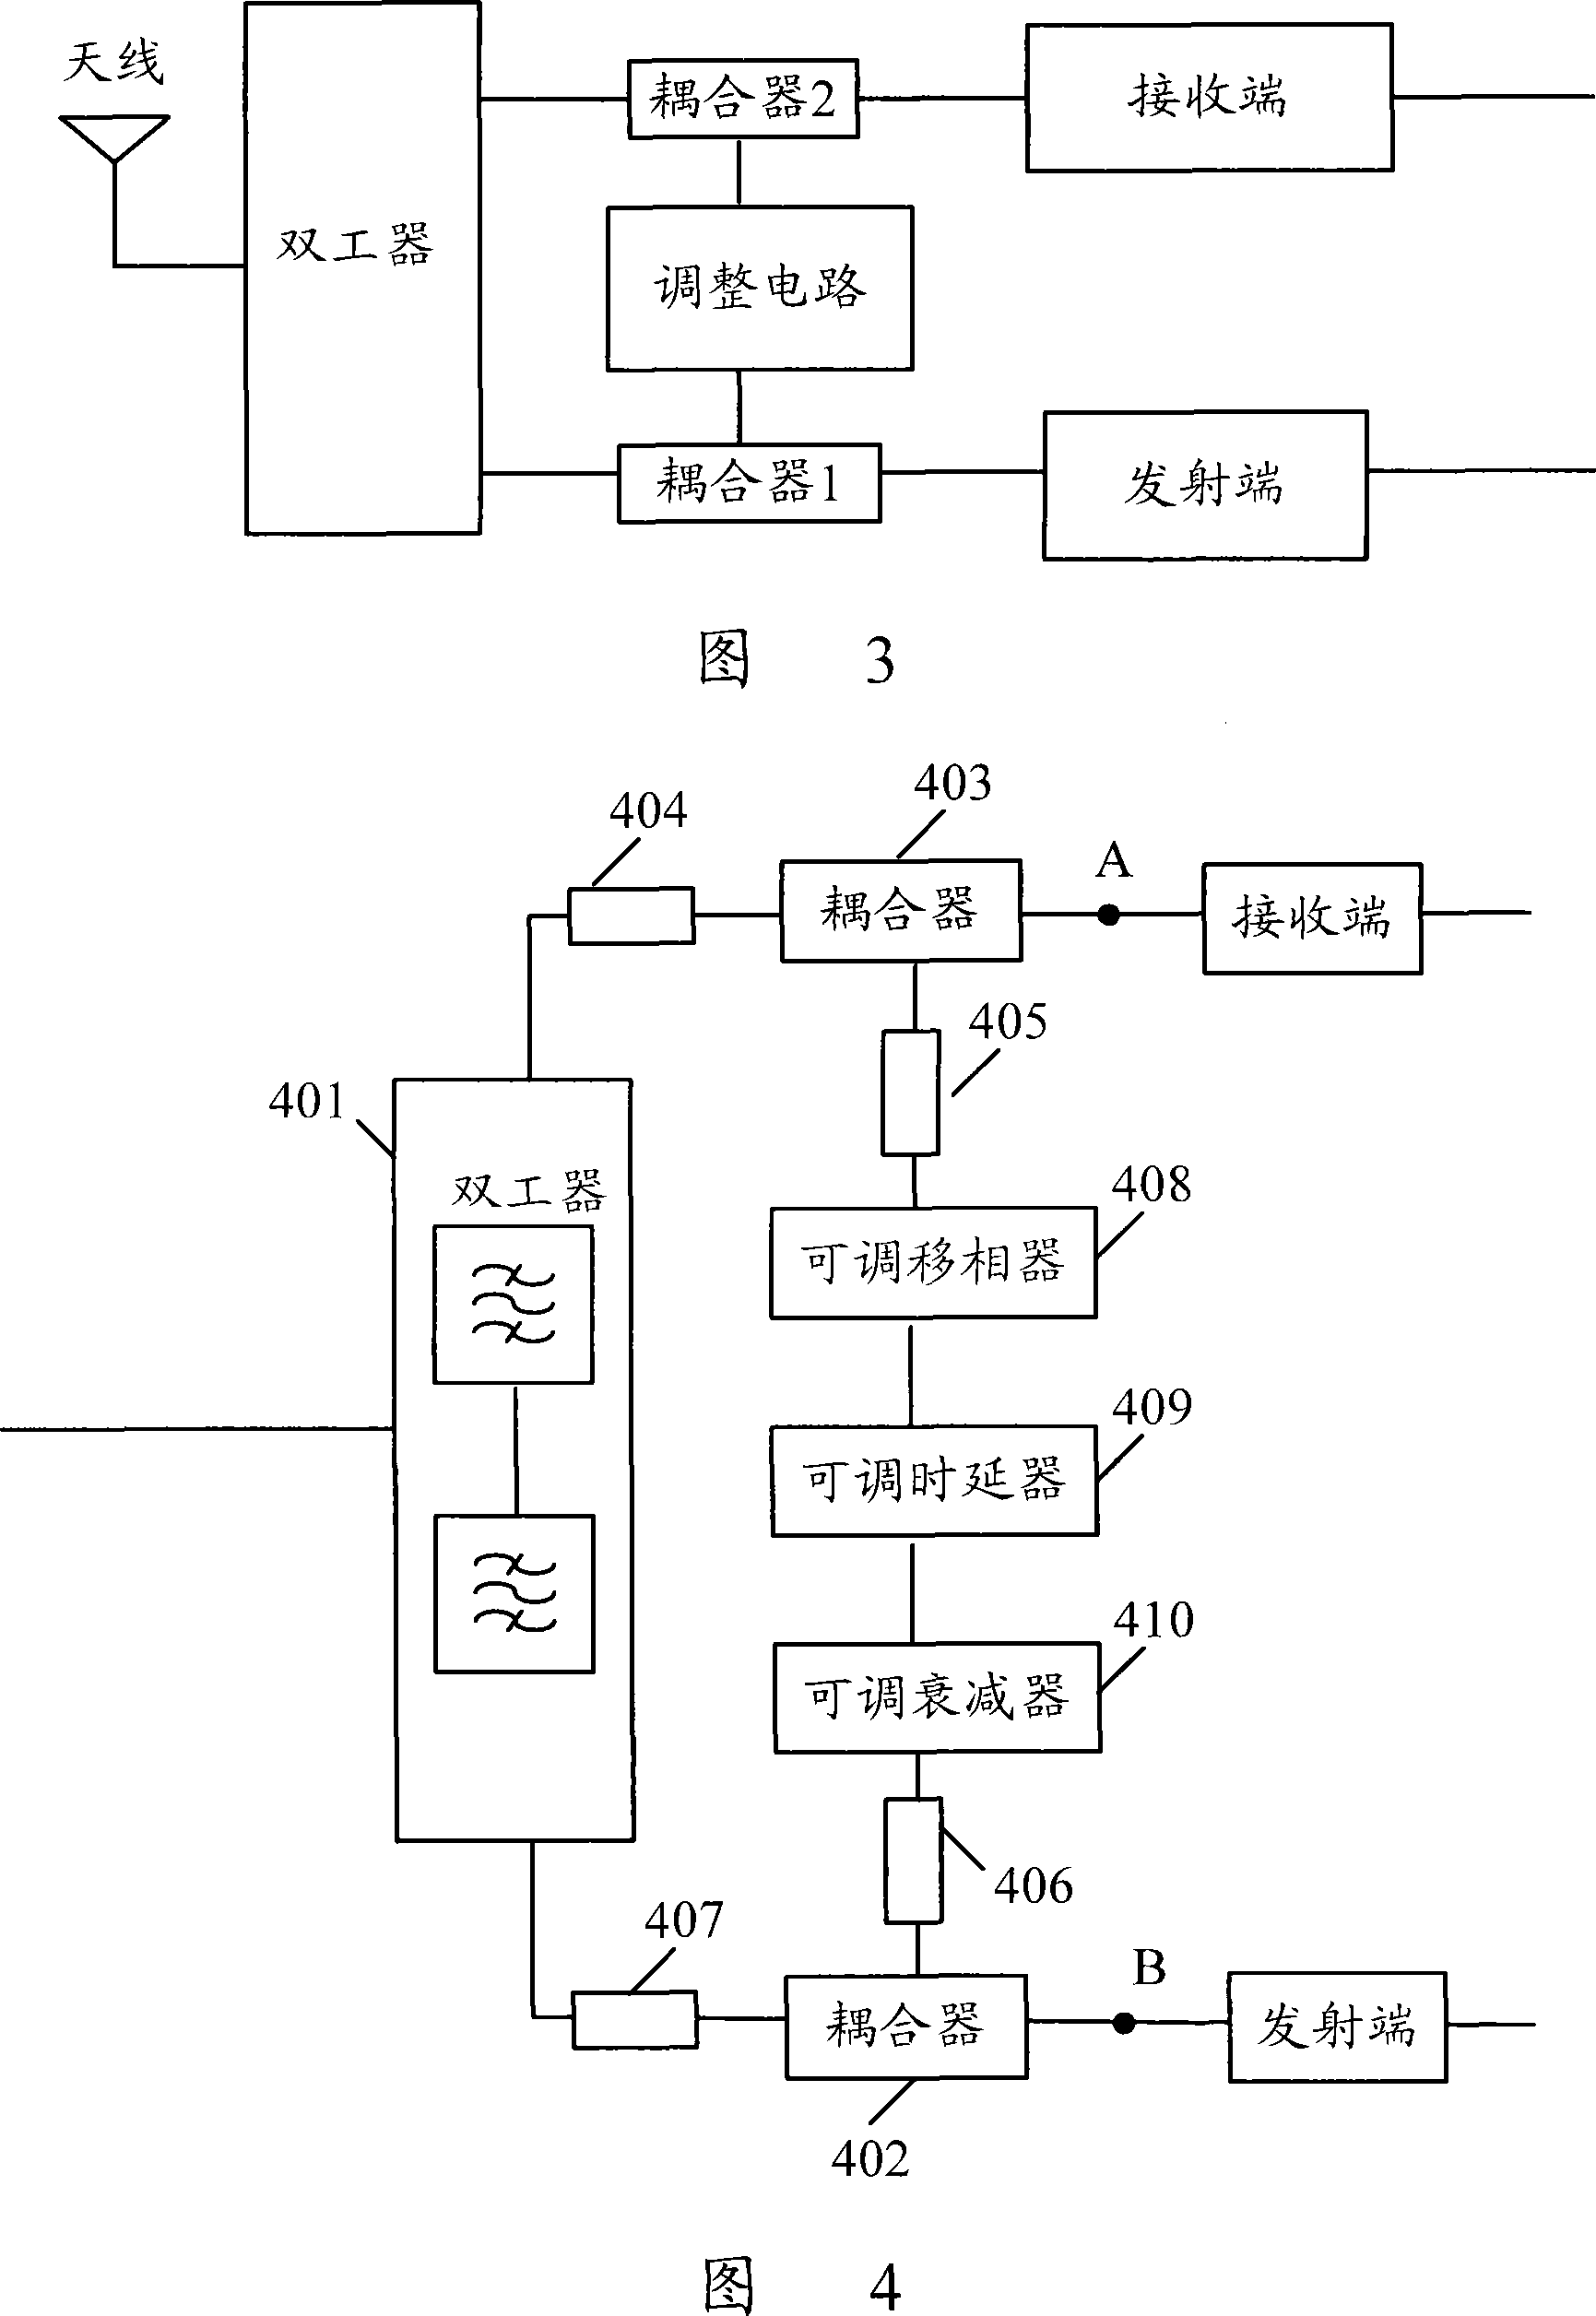 Method and device for enhancing transmitting-receiving isolation of mobile terminal